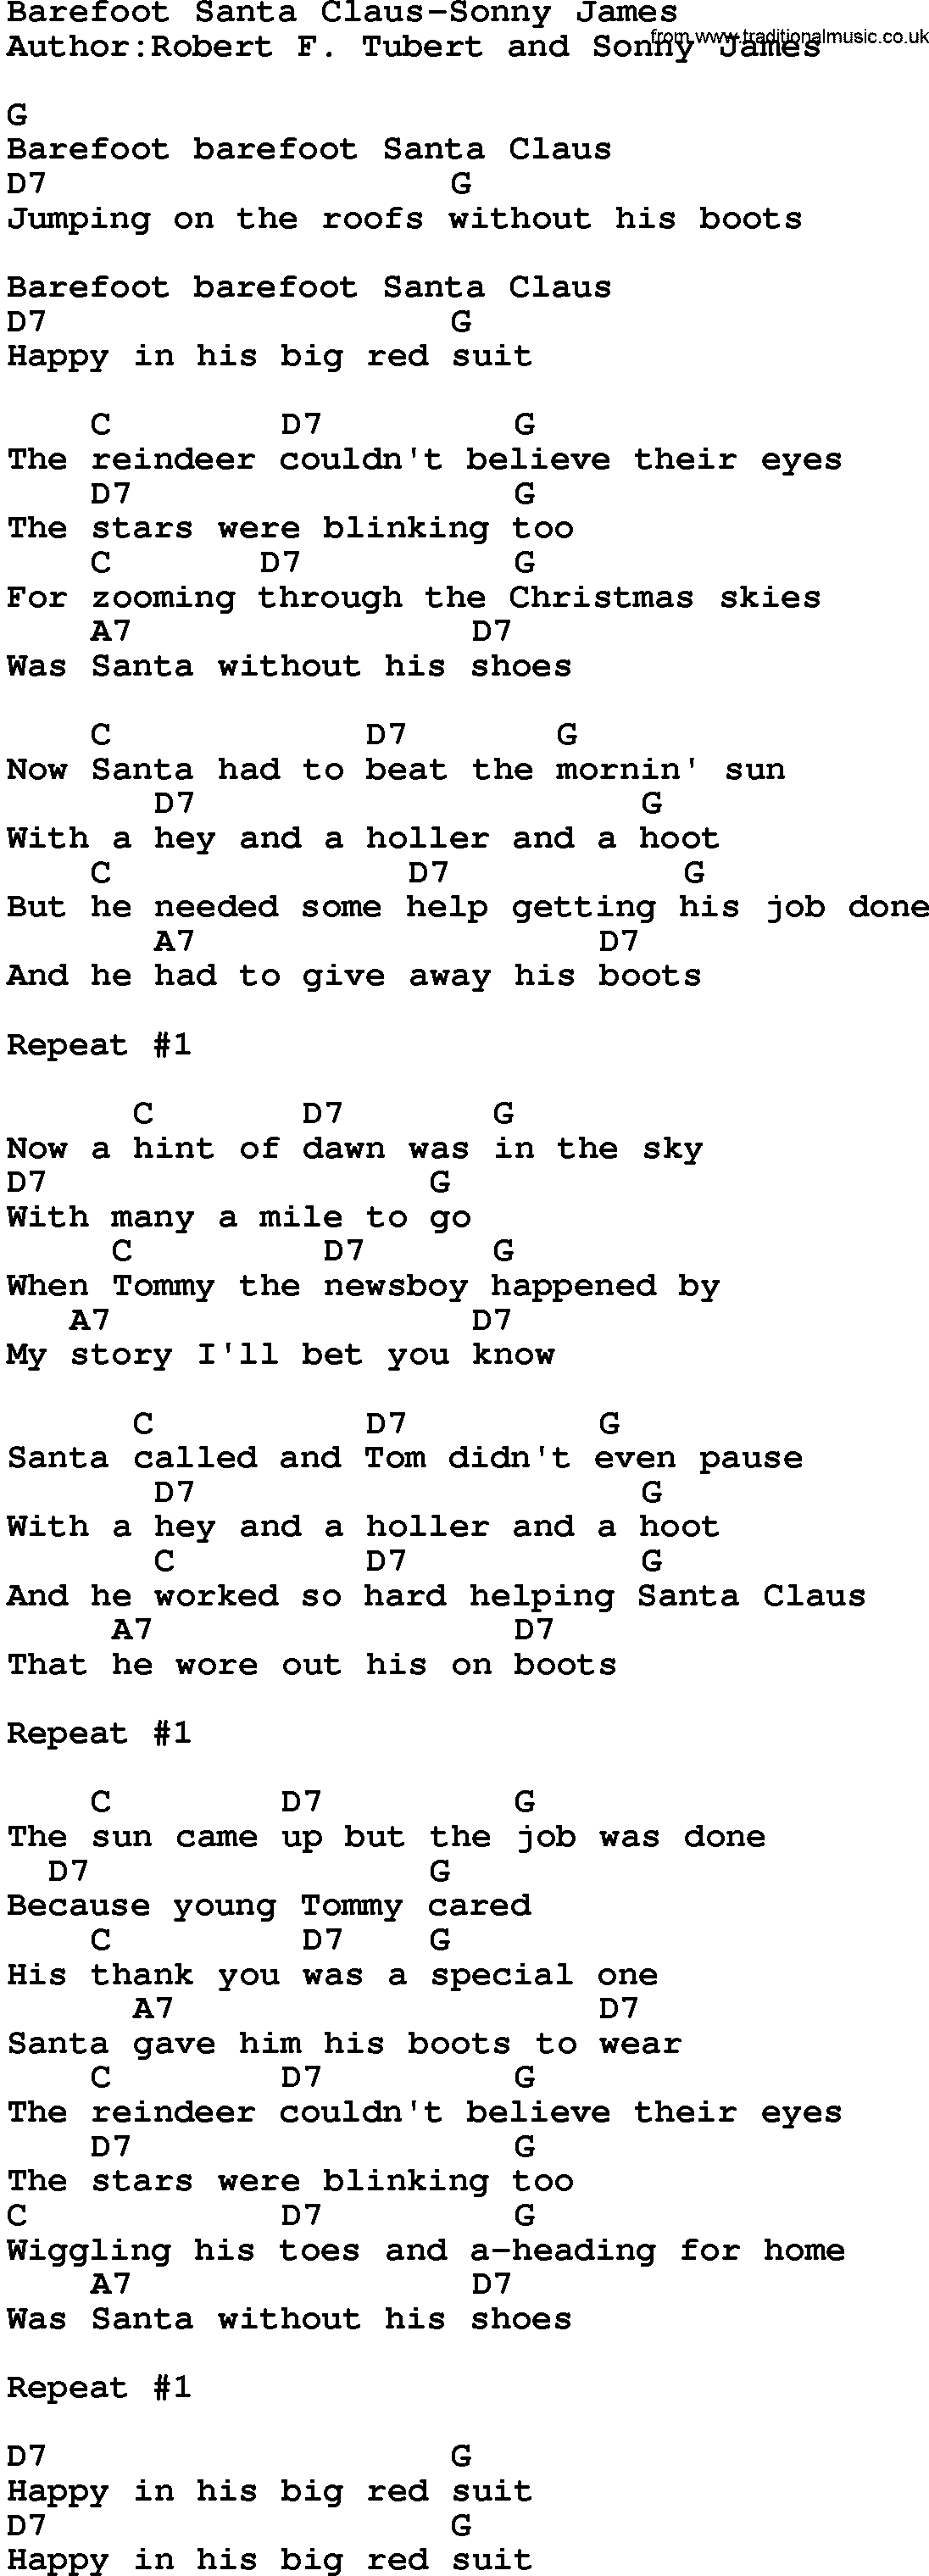 Country music song: Barefoot Santa Claus-Sonny James lyrics and chords